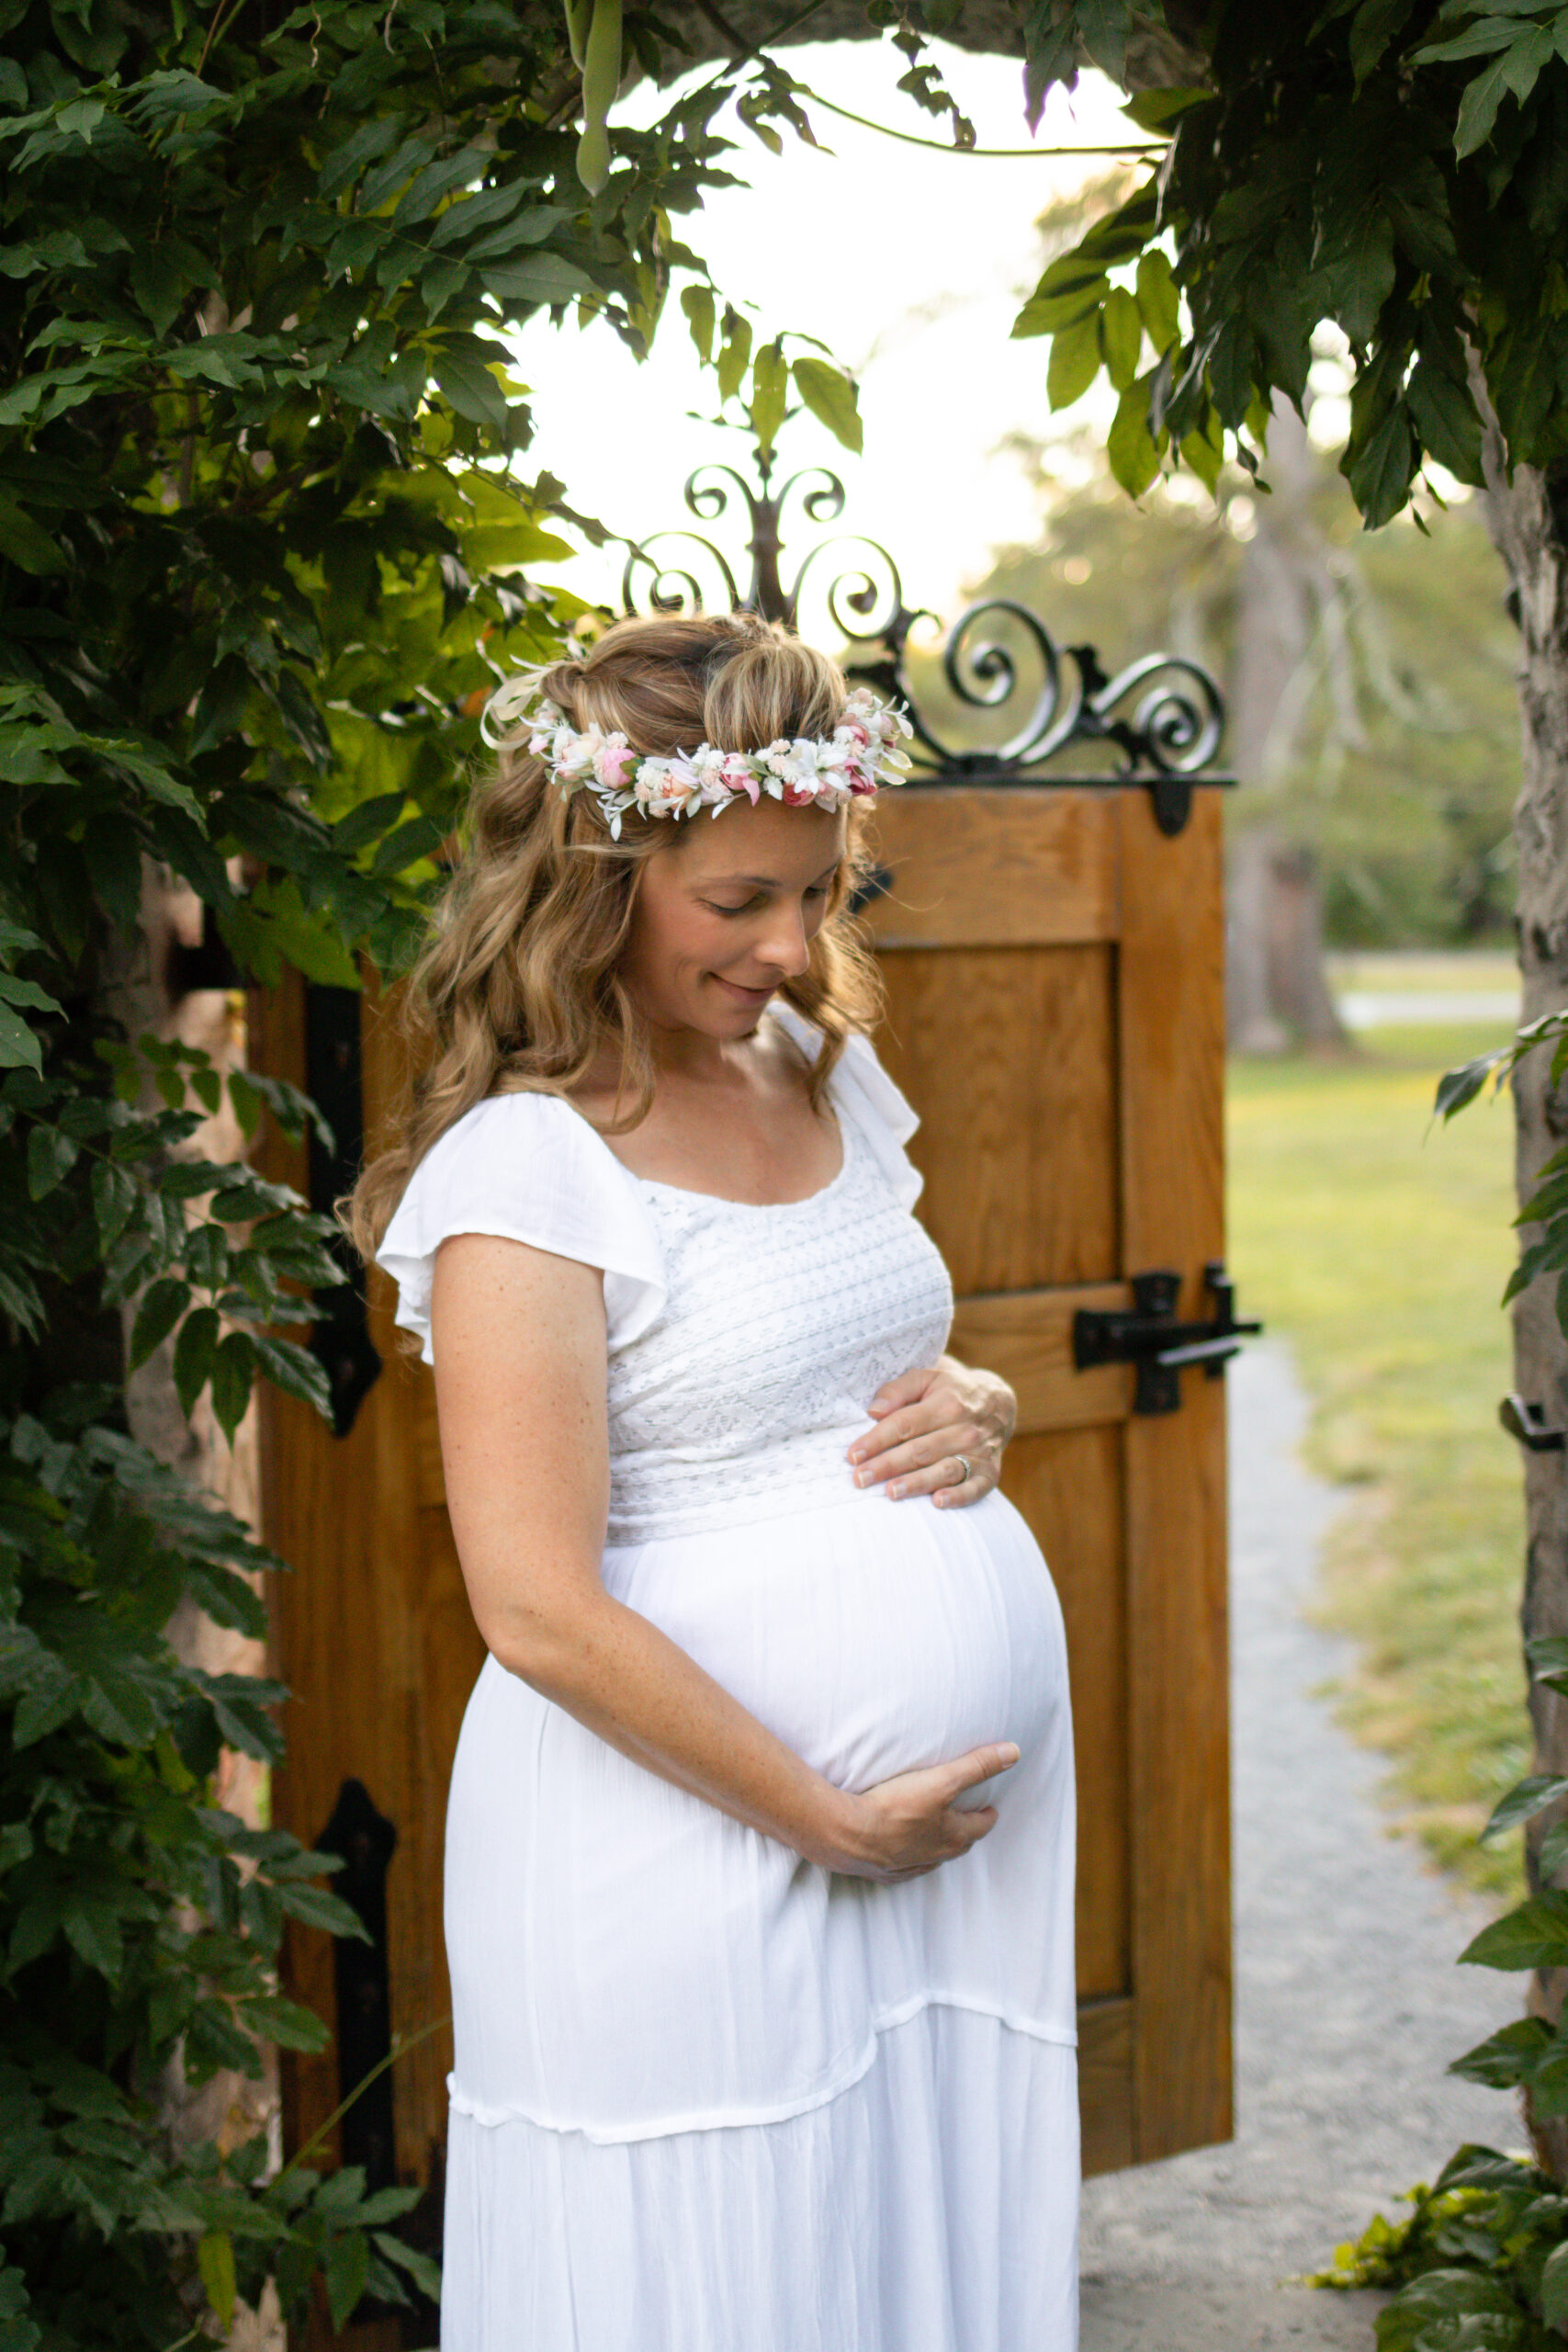 A serene pregnant woman in a white dress and floral headband stands gently cradling her belly under a leafy archway, with soft sunlight filtering through the foliage.